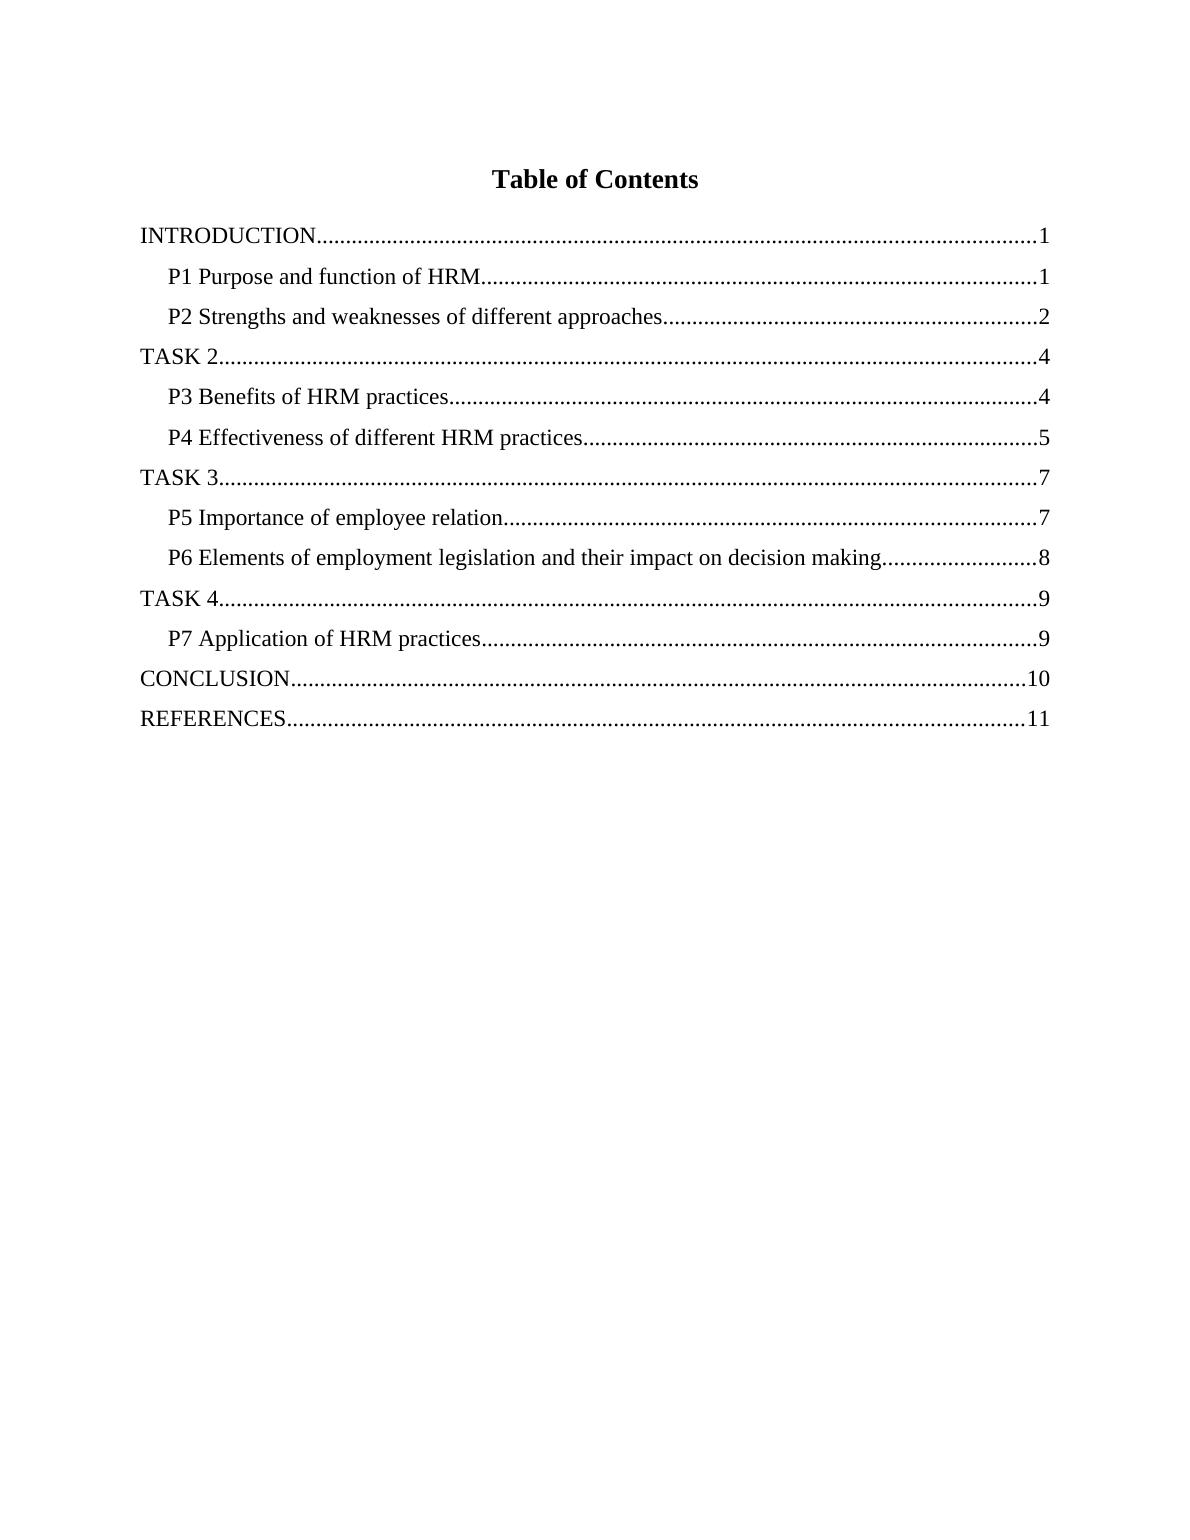 Report on Functions of Human Resource Management_2